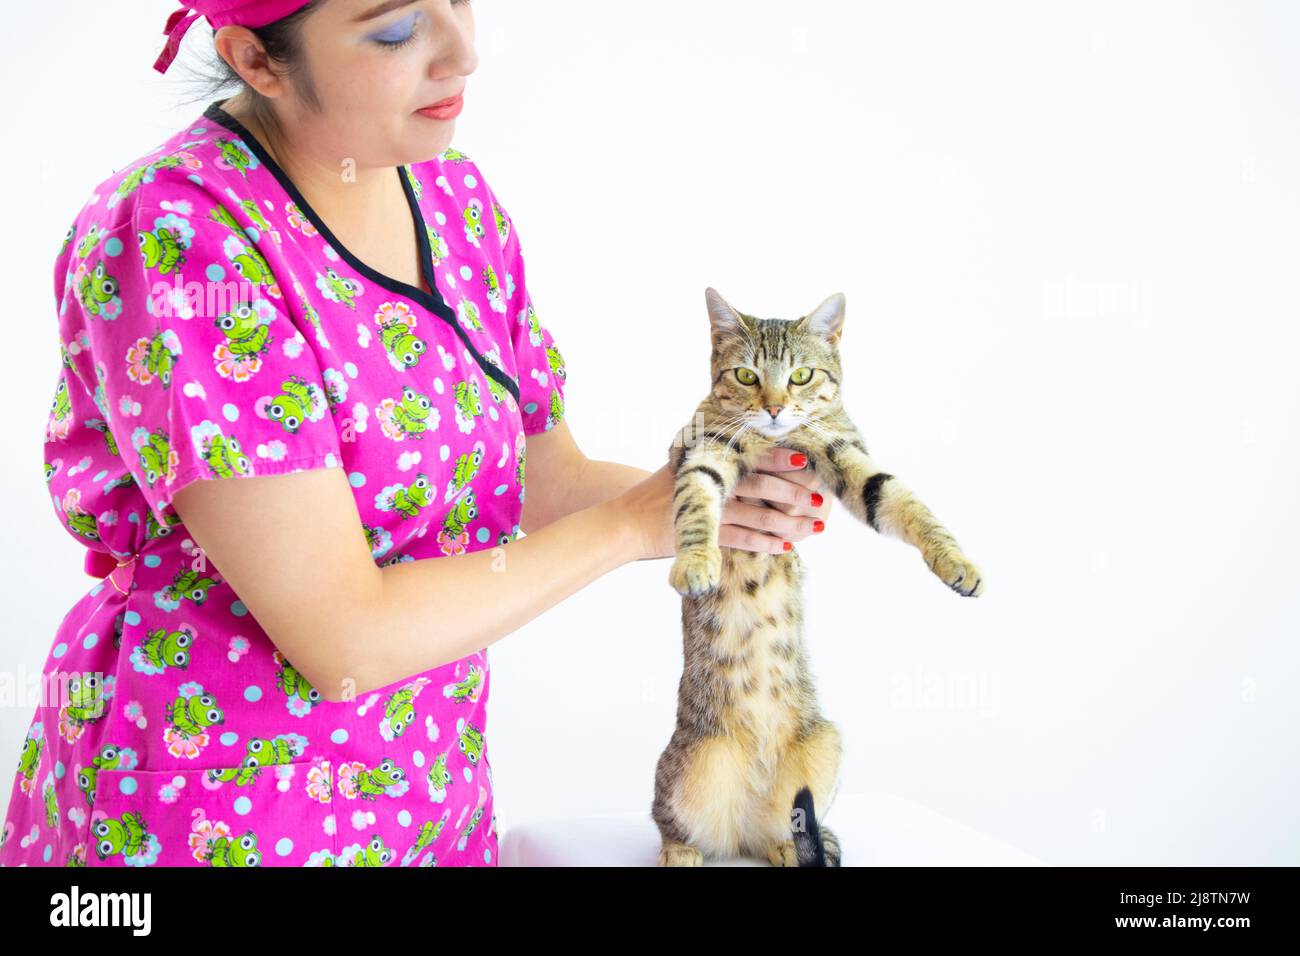 beautiful woman veterinary doctor wearing pink uniform and pink surgical cap, checking cute kitten that poses on two paws on white background Stock Photo